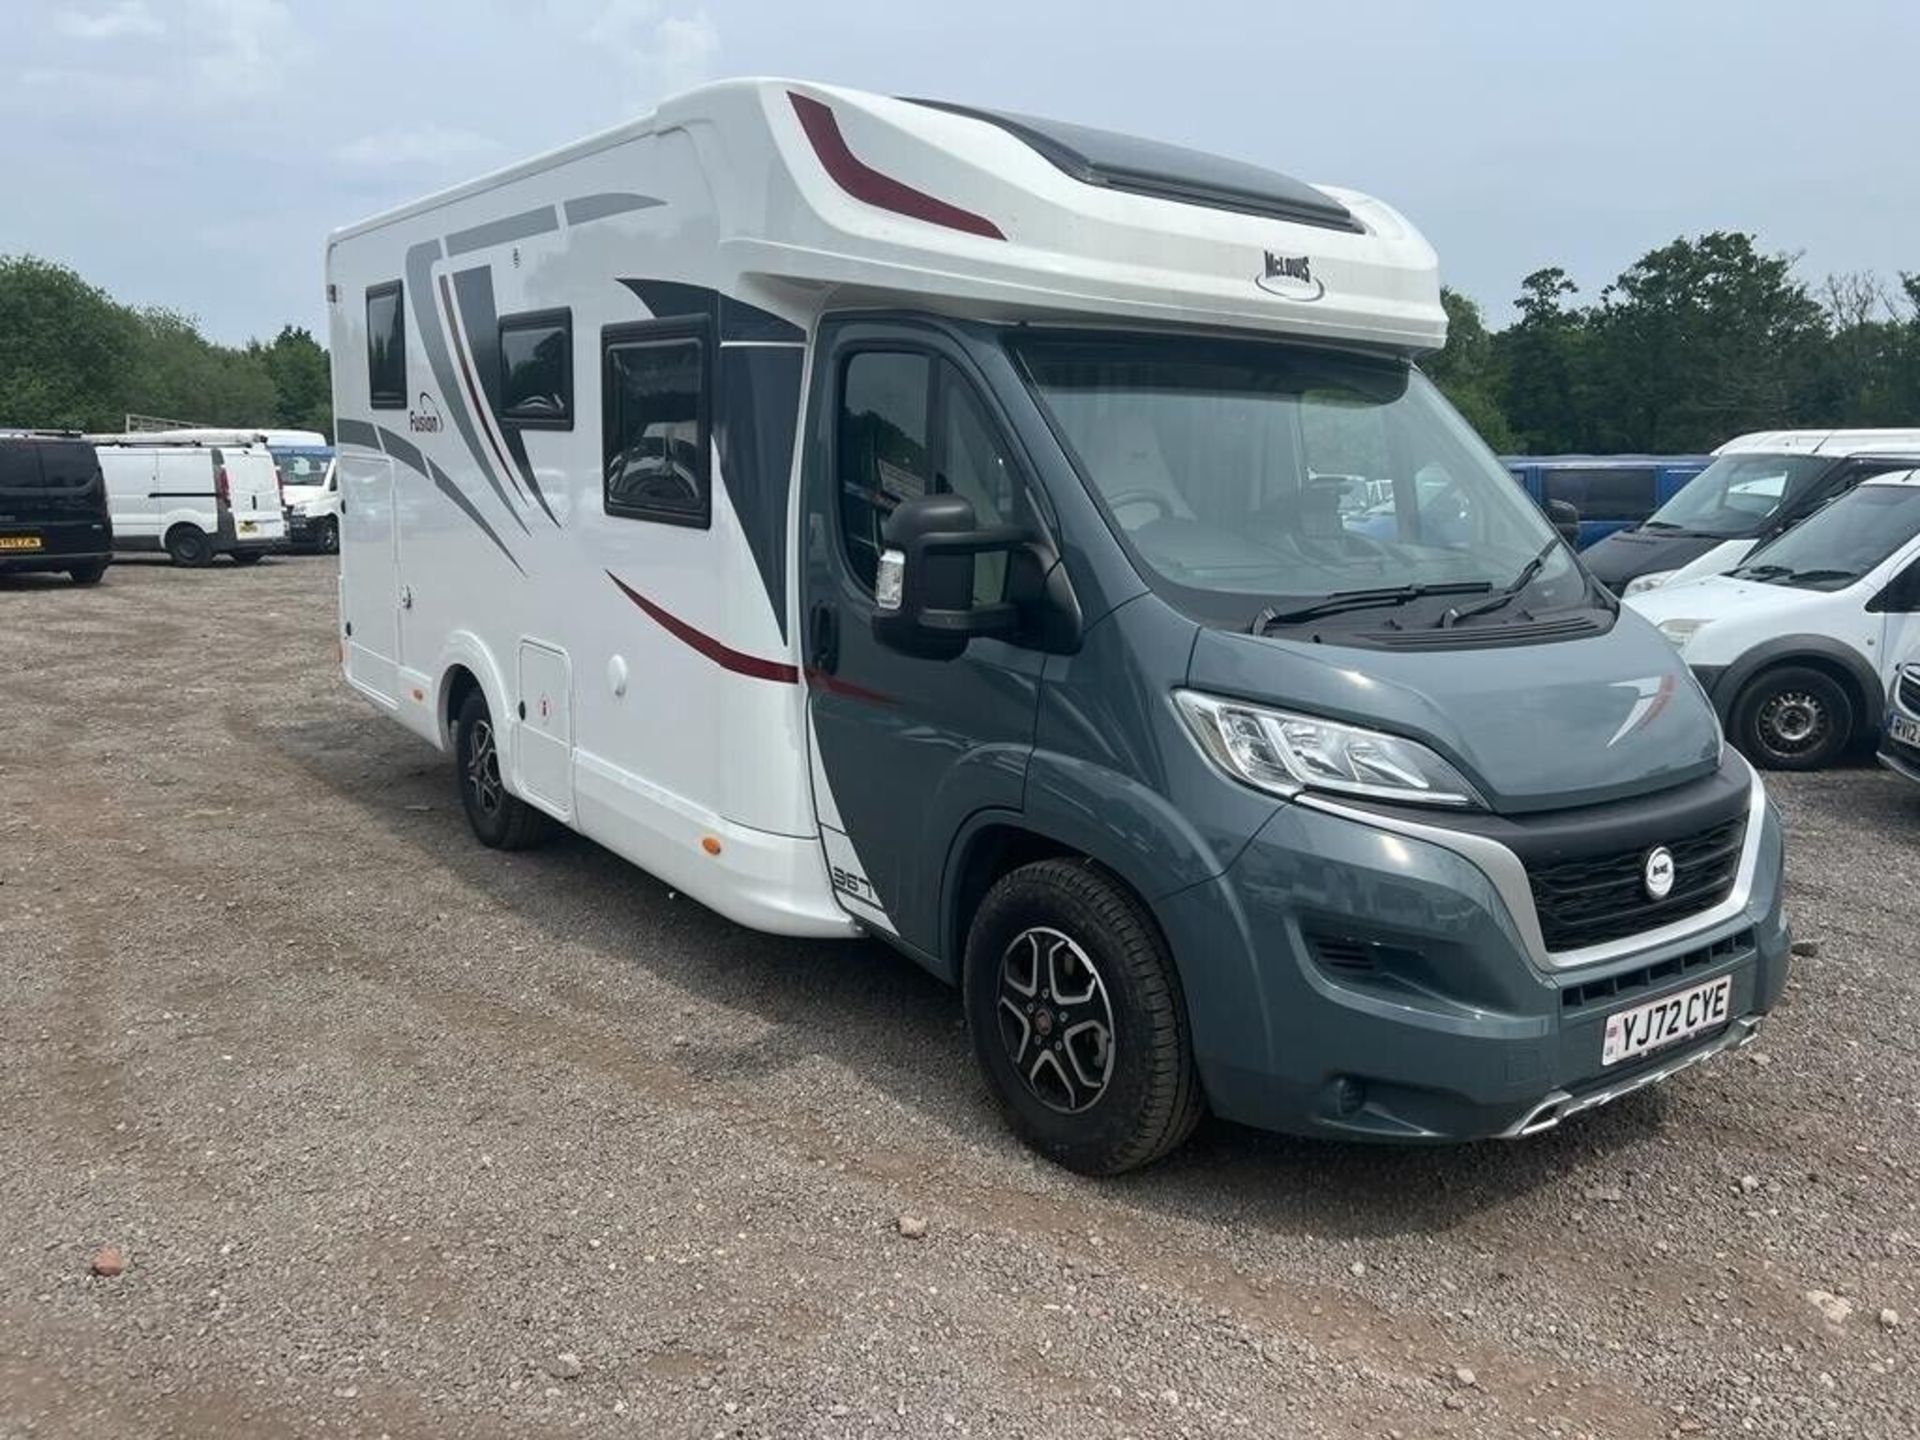 72 PLATE - ONLY 750 MILES! FIAT MCLOUIS FUSION 367: IMMACULATE MOTORHOME JOY >NO VAT ON HAMMER< - Image 2 of 15